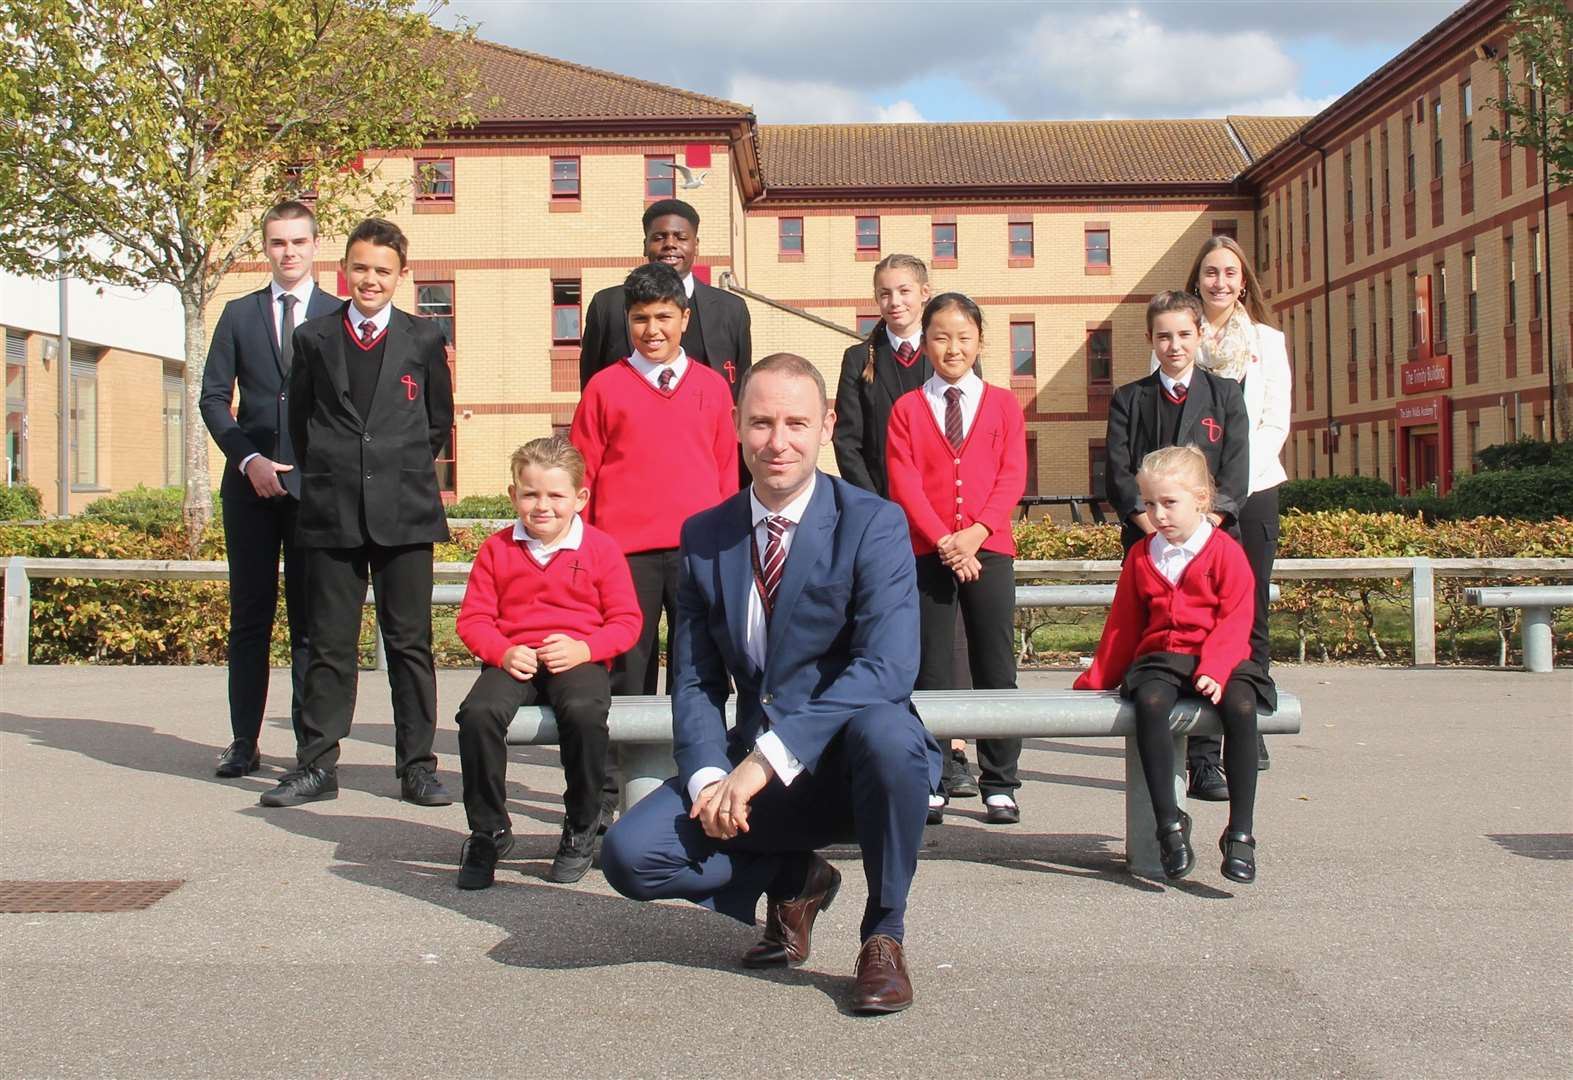 Damian McBeath only started his role as John Wallis head teacher in September